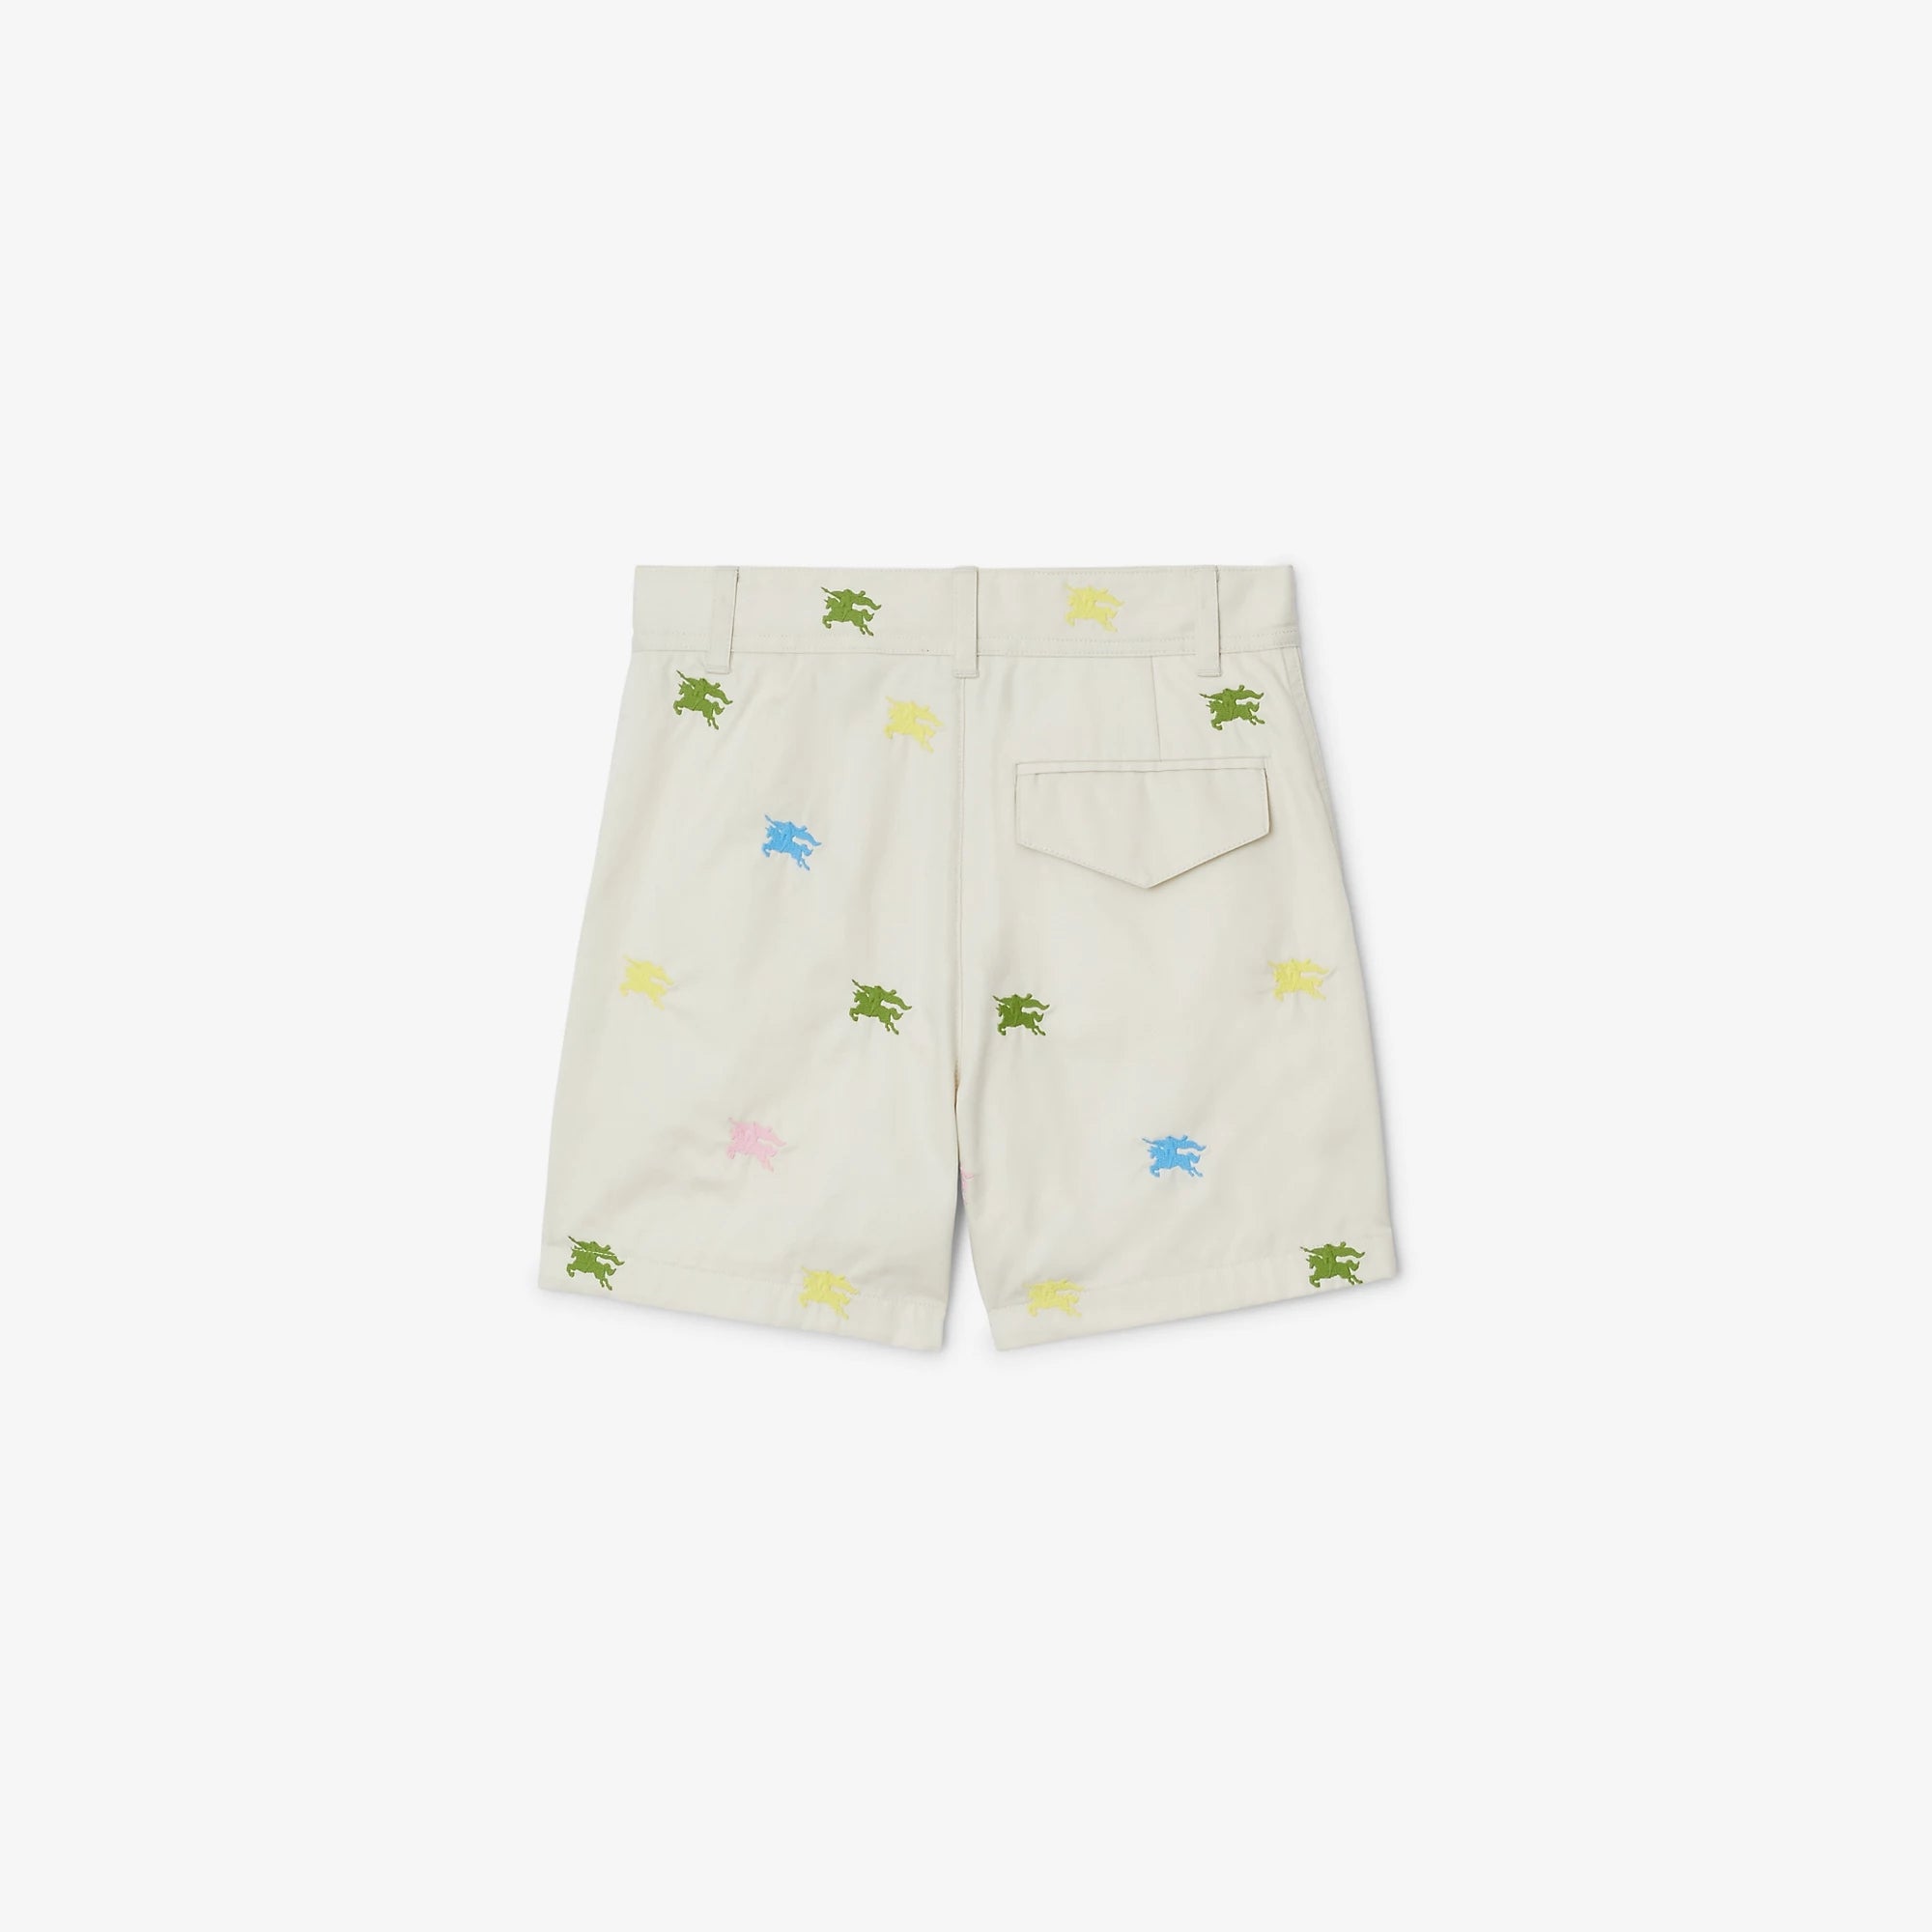 Boys & Girls White Embroidered Cotton Shorts